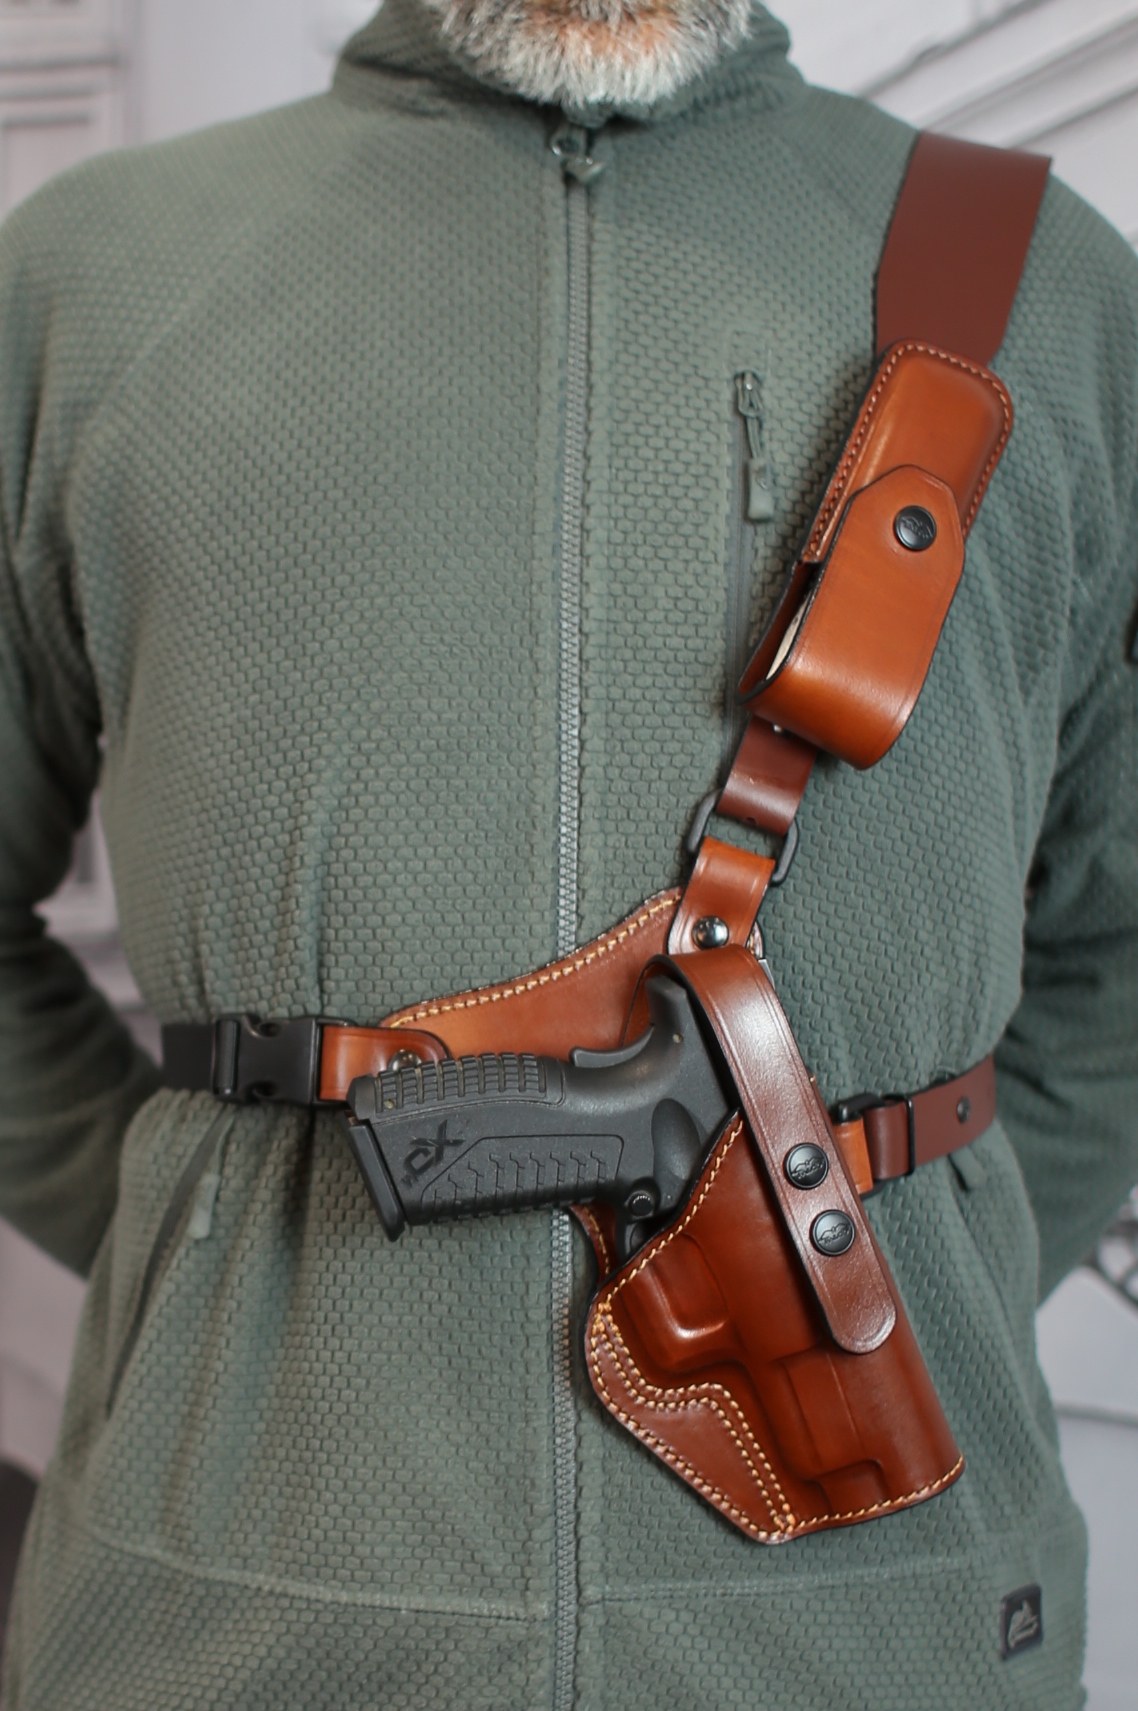 Top 5 Hunter Holsters